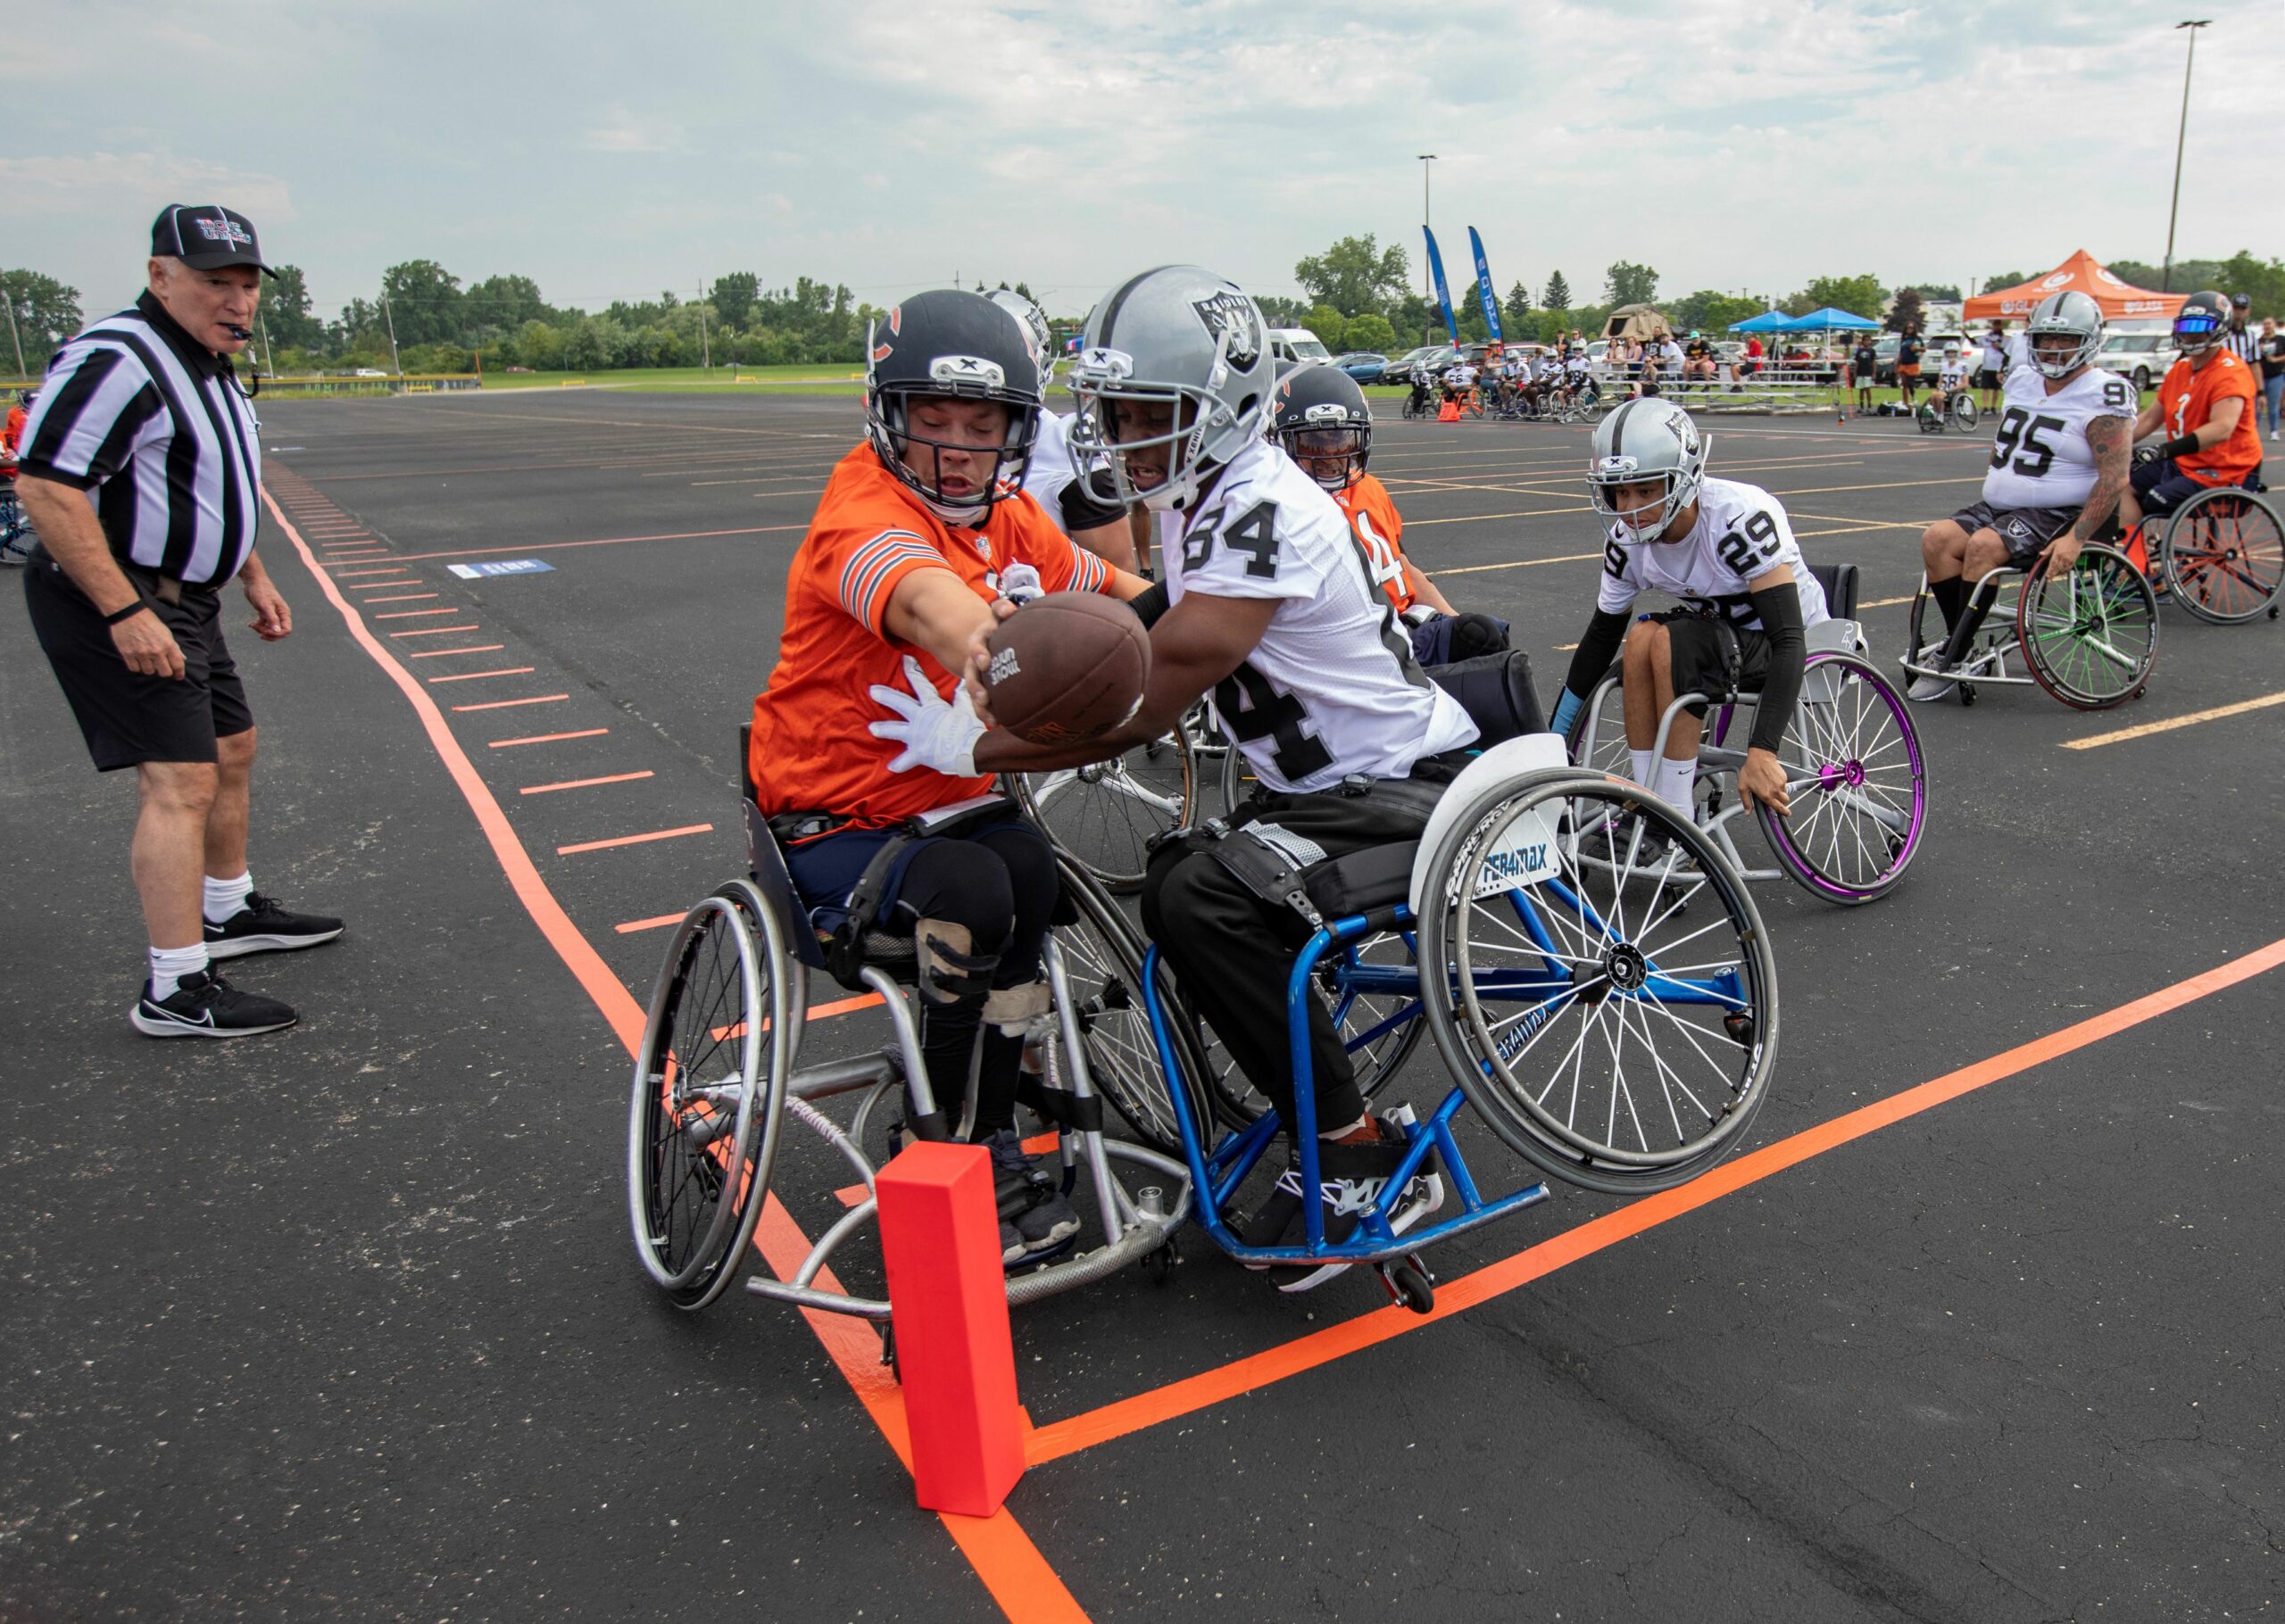 A wheelchair football player reaches across the end zone with the ball as a defender approaches